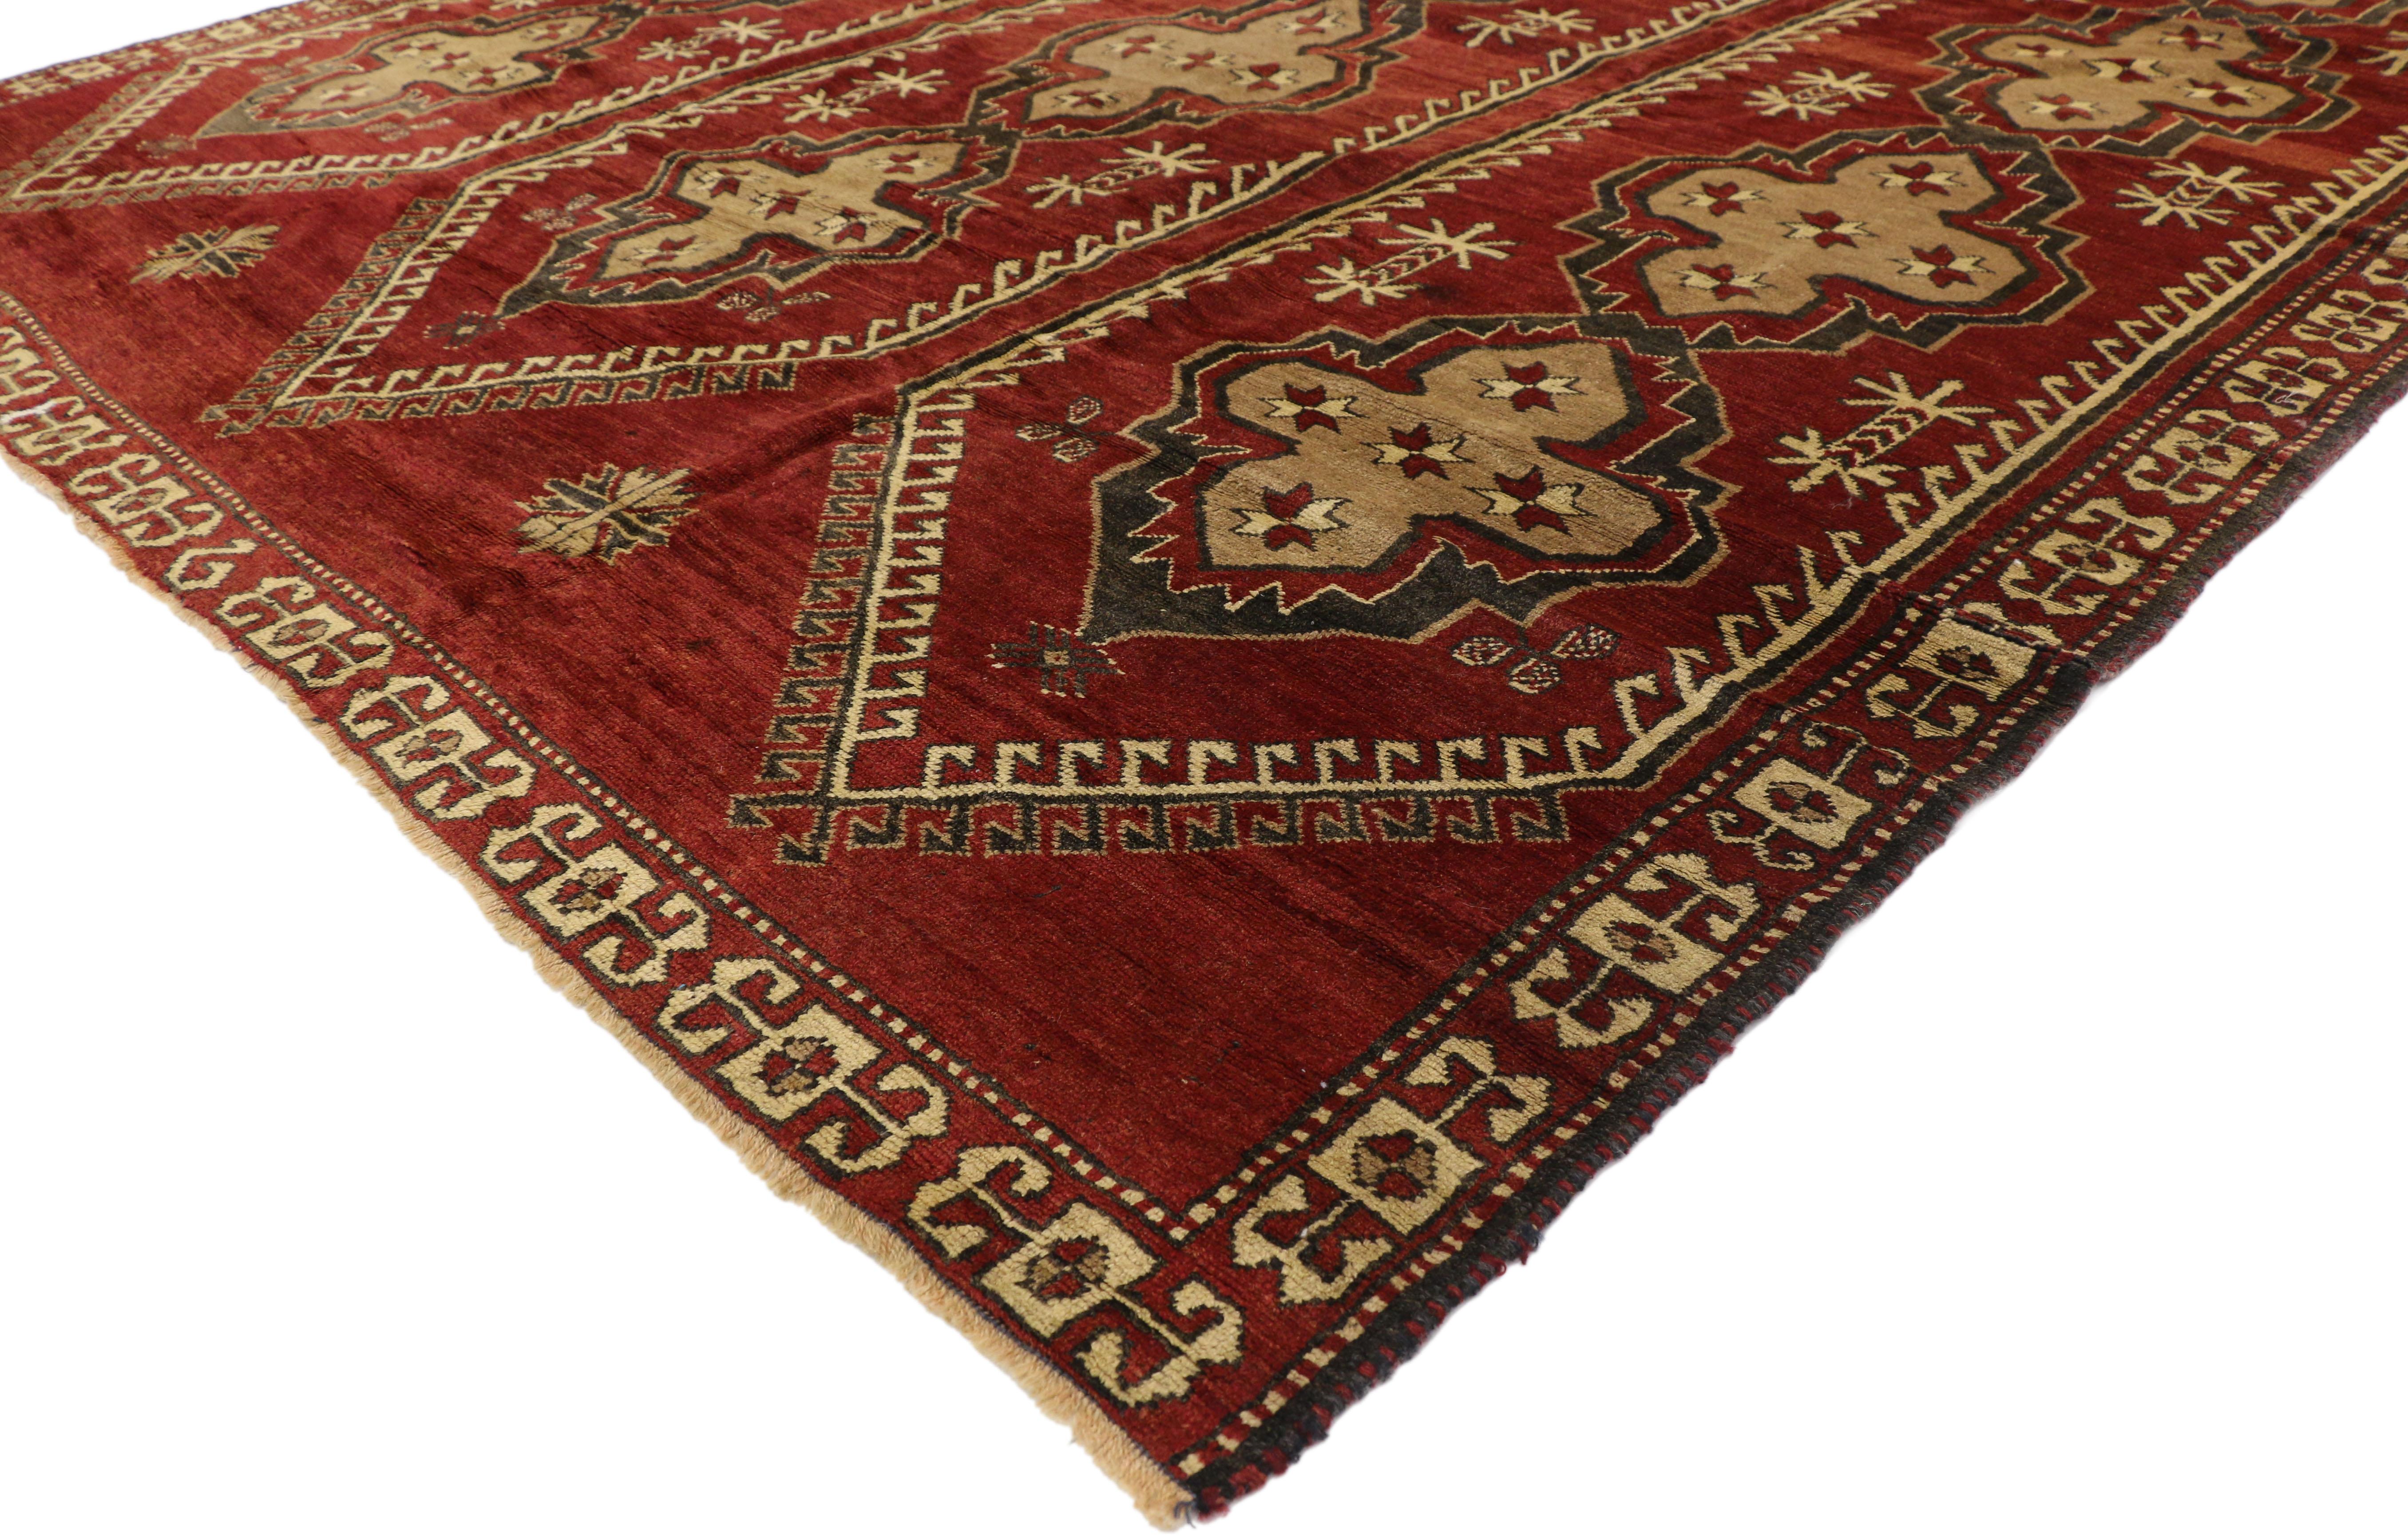 51442 Vintage Turkish Oushak Rug with Mid-Century Modern Style. This hand-knotted wool vintage Turkish Oushak rug features three vertical columns each filled with four cruciform cross-motifs dotted with ancient Anatolian symbols. The hexagonal